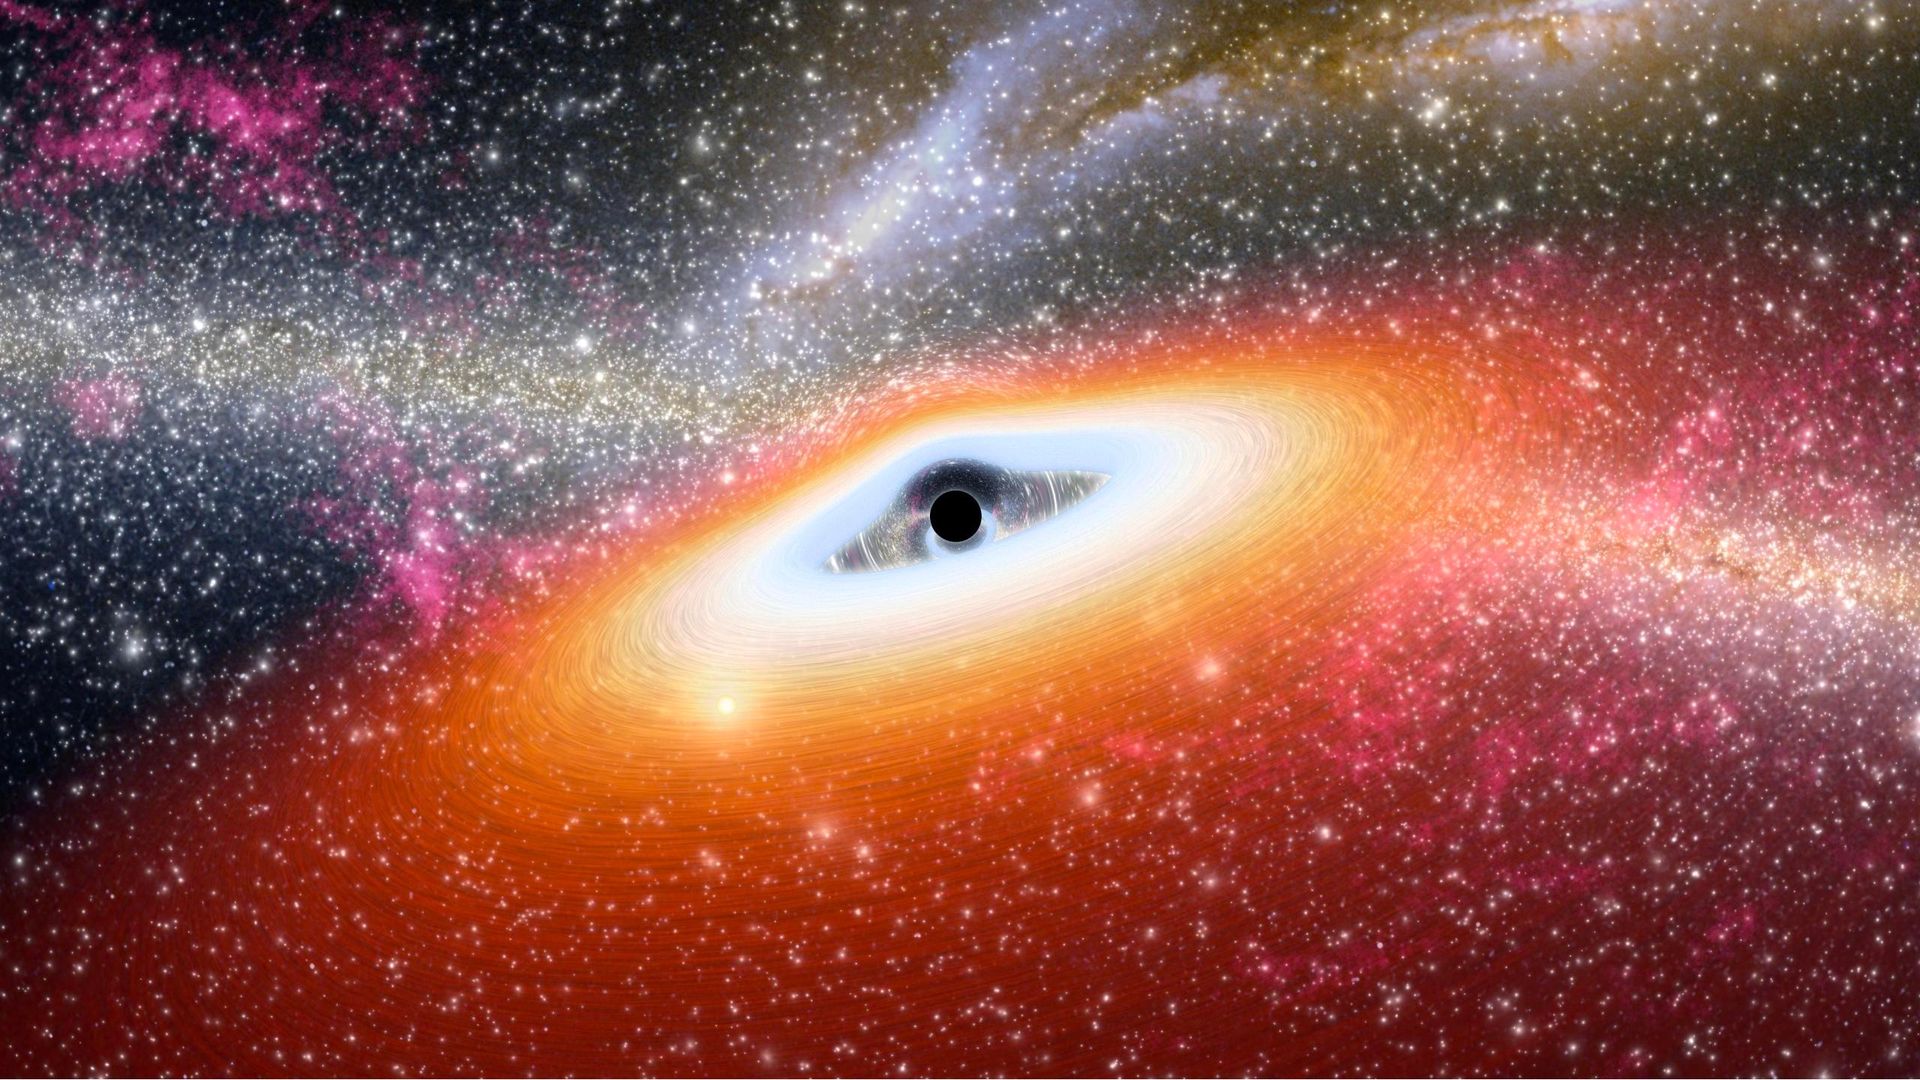 Astronomers Are Preparing To Create The First Image Of An Actual Black Hole Techradar